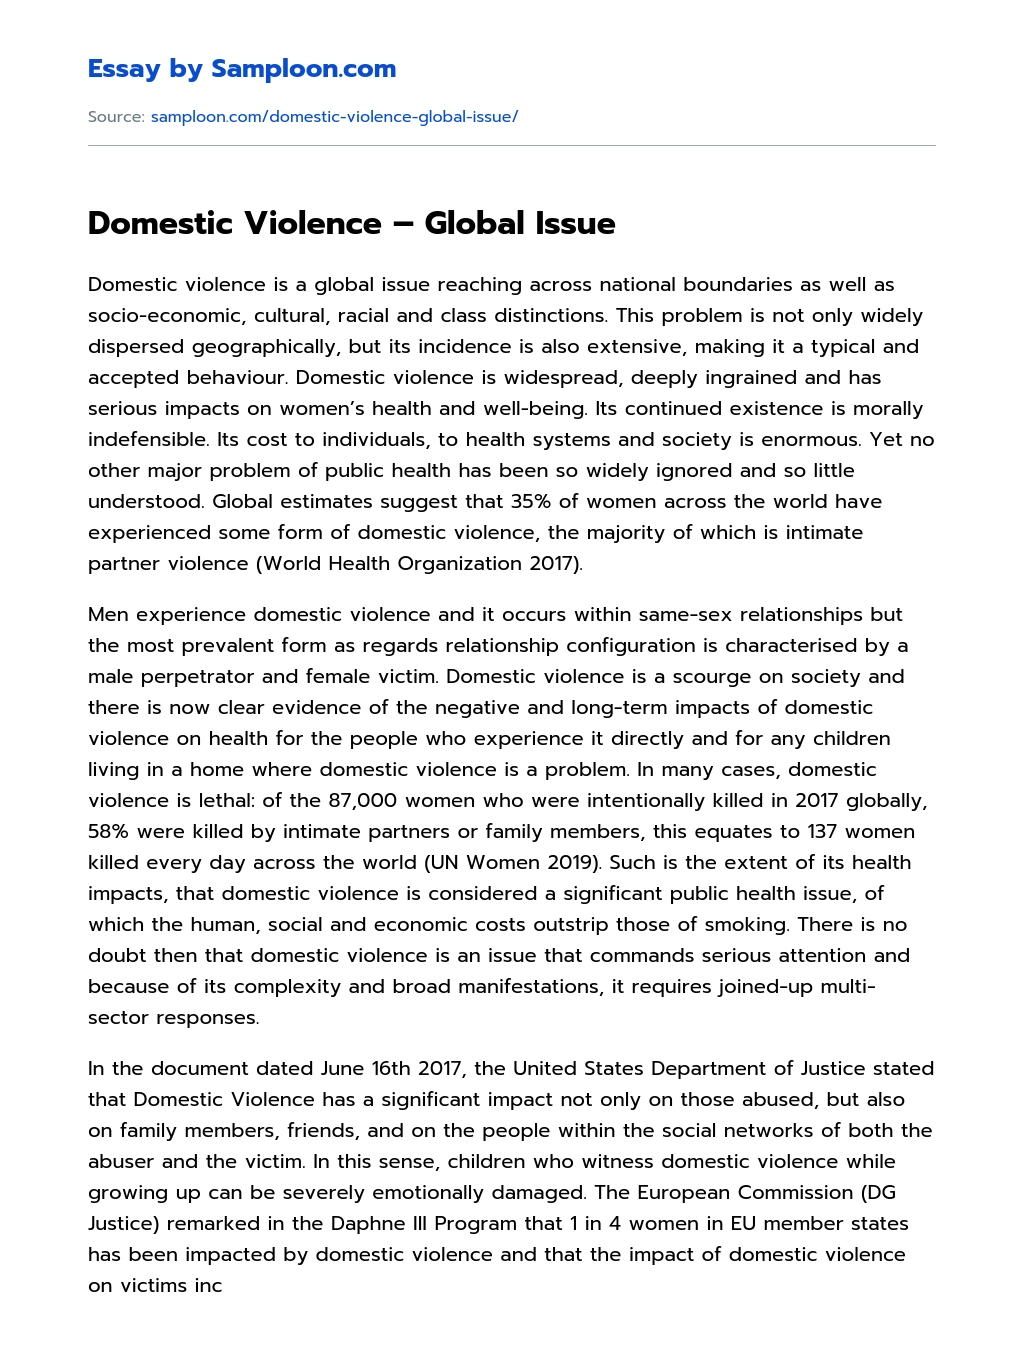 Domestic Violence – Global Issue essay